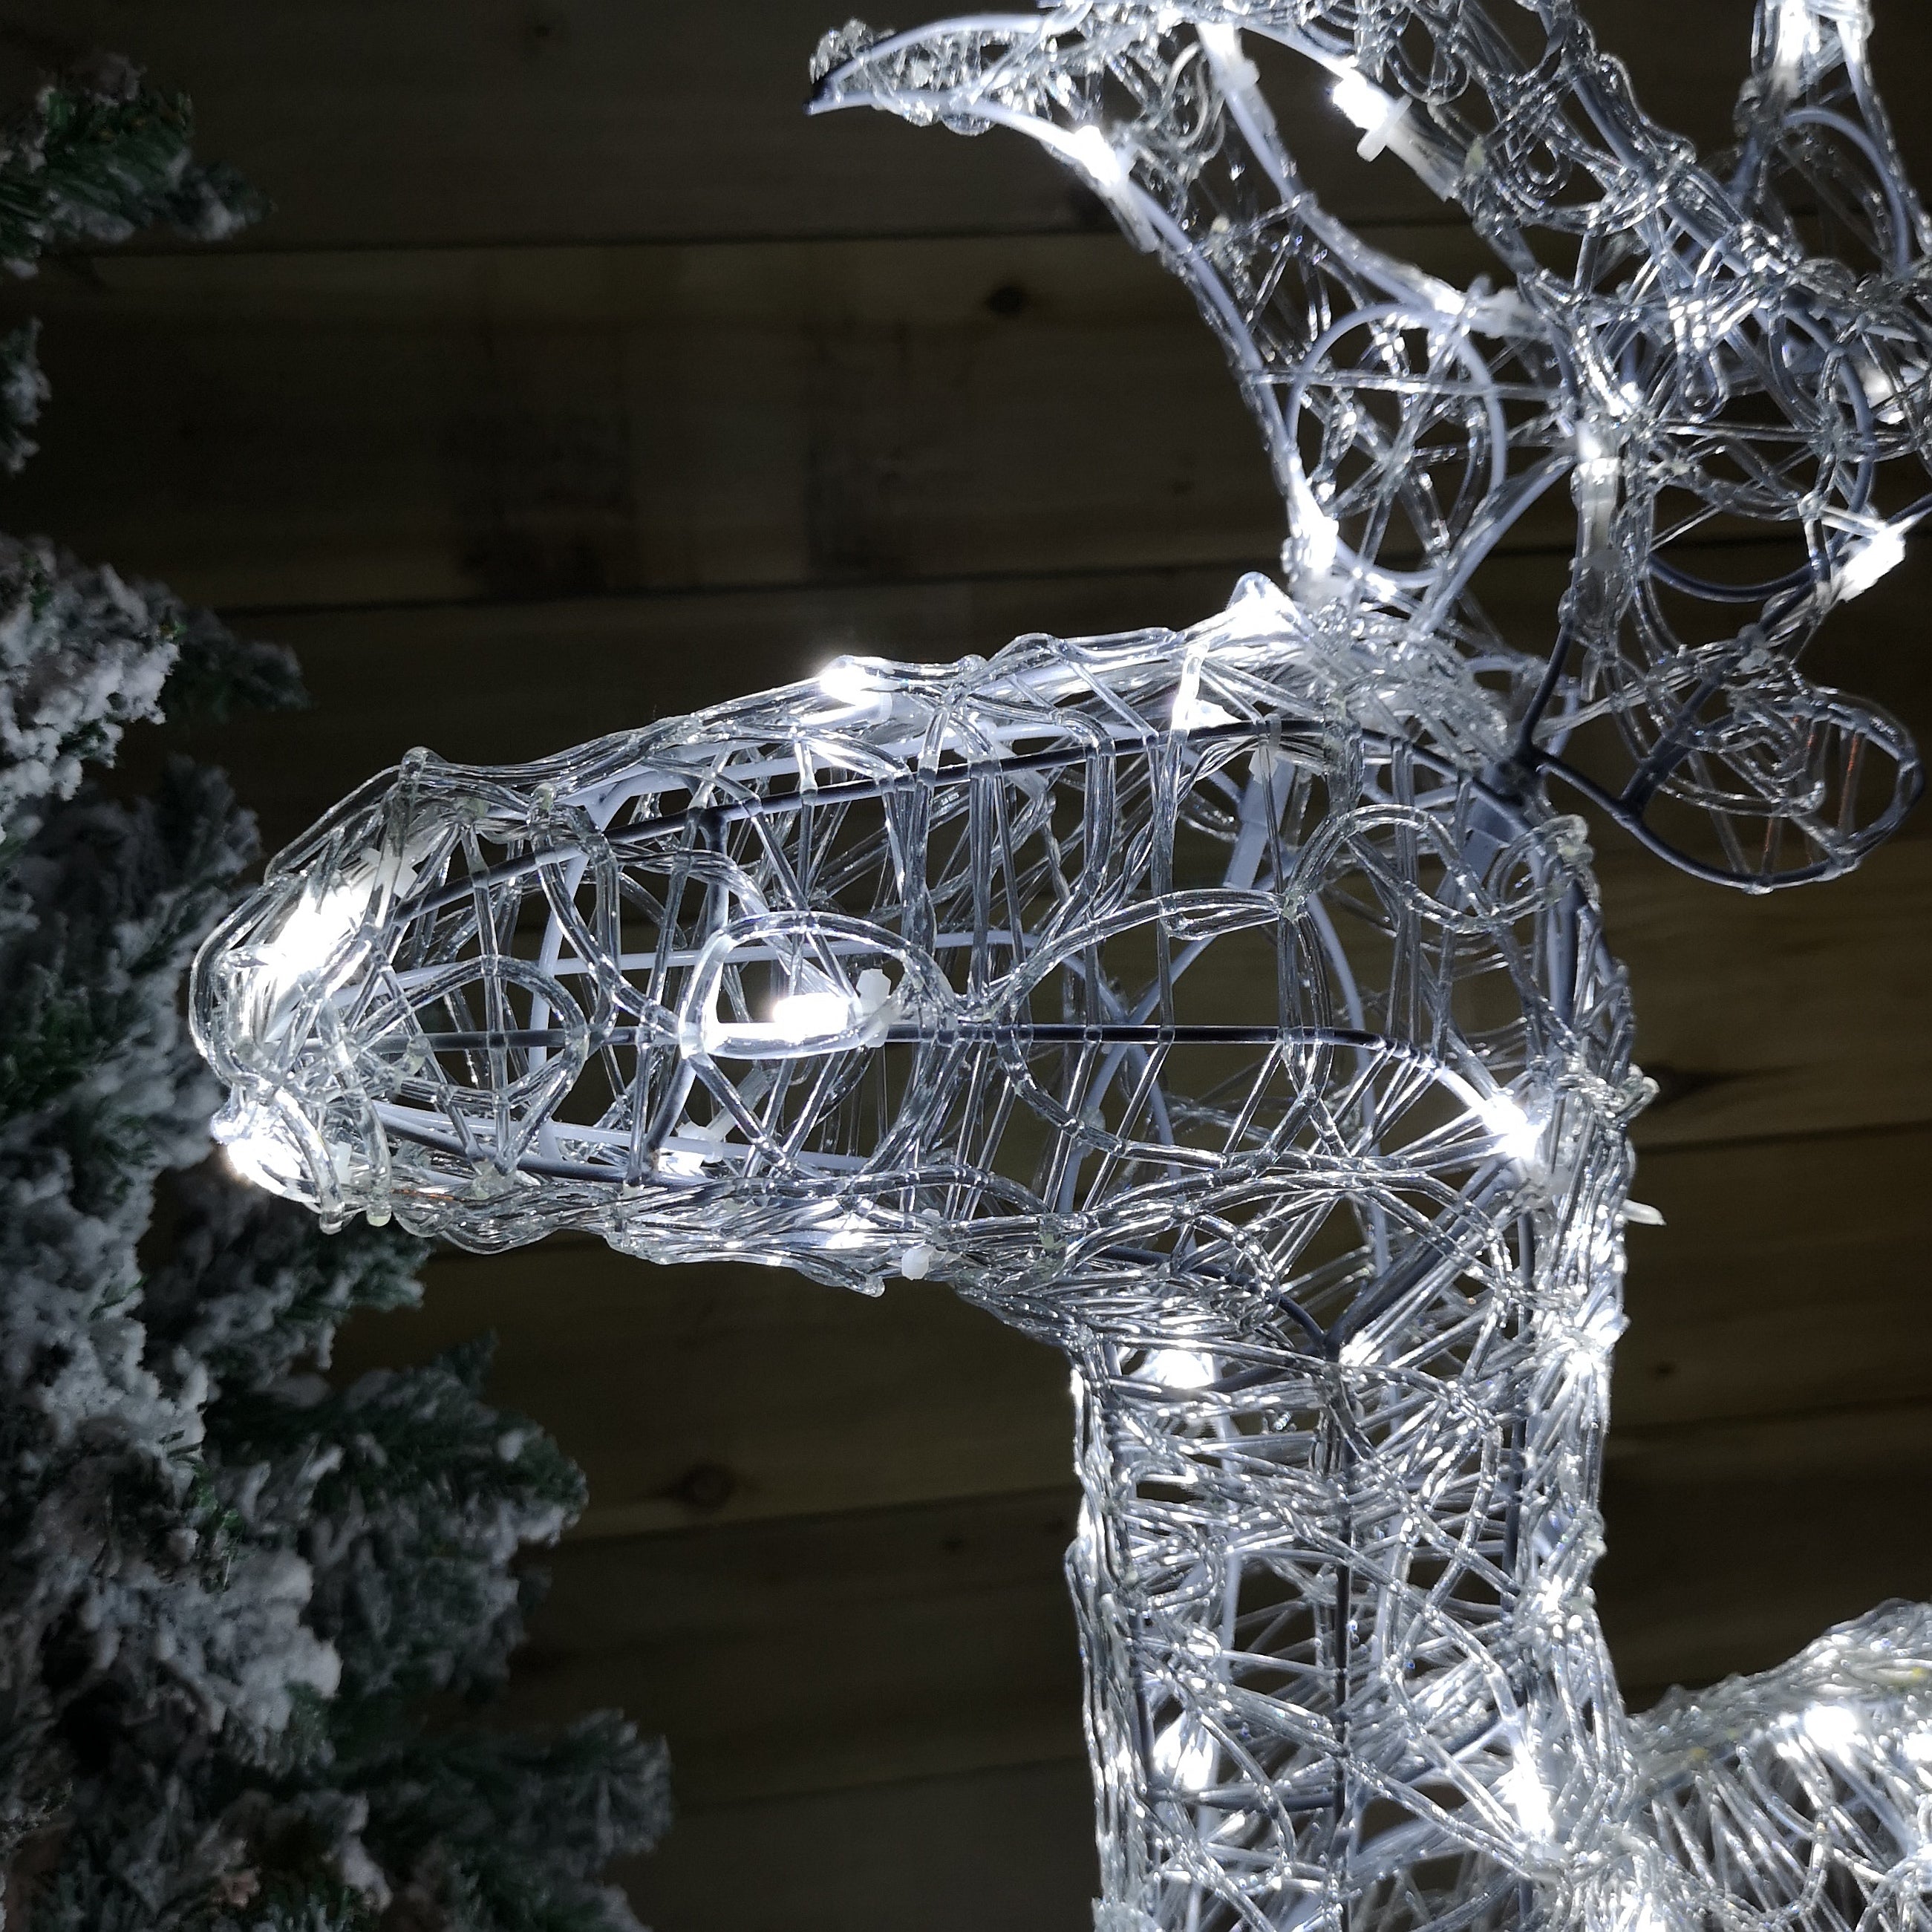 116cm Soft Acrylic Flashing LED Reindeer Christmas Decoration with Timer in Cool White